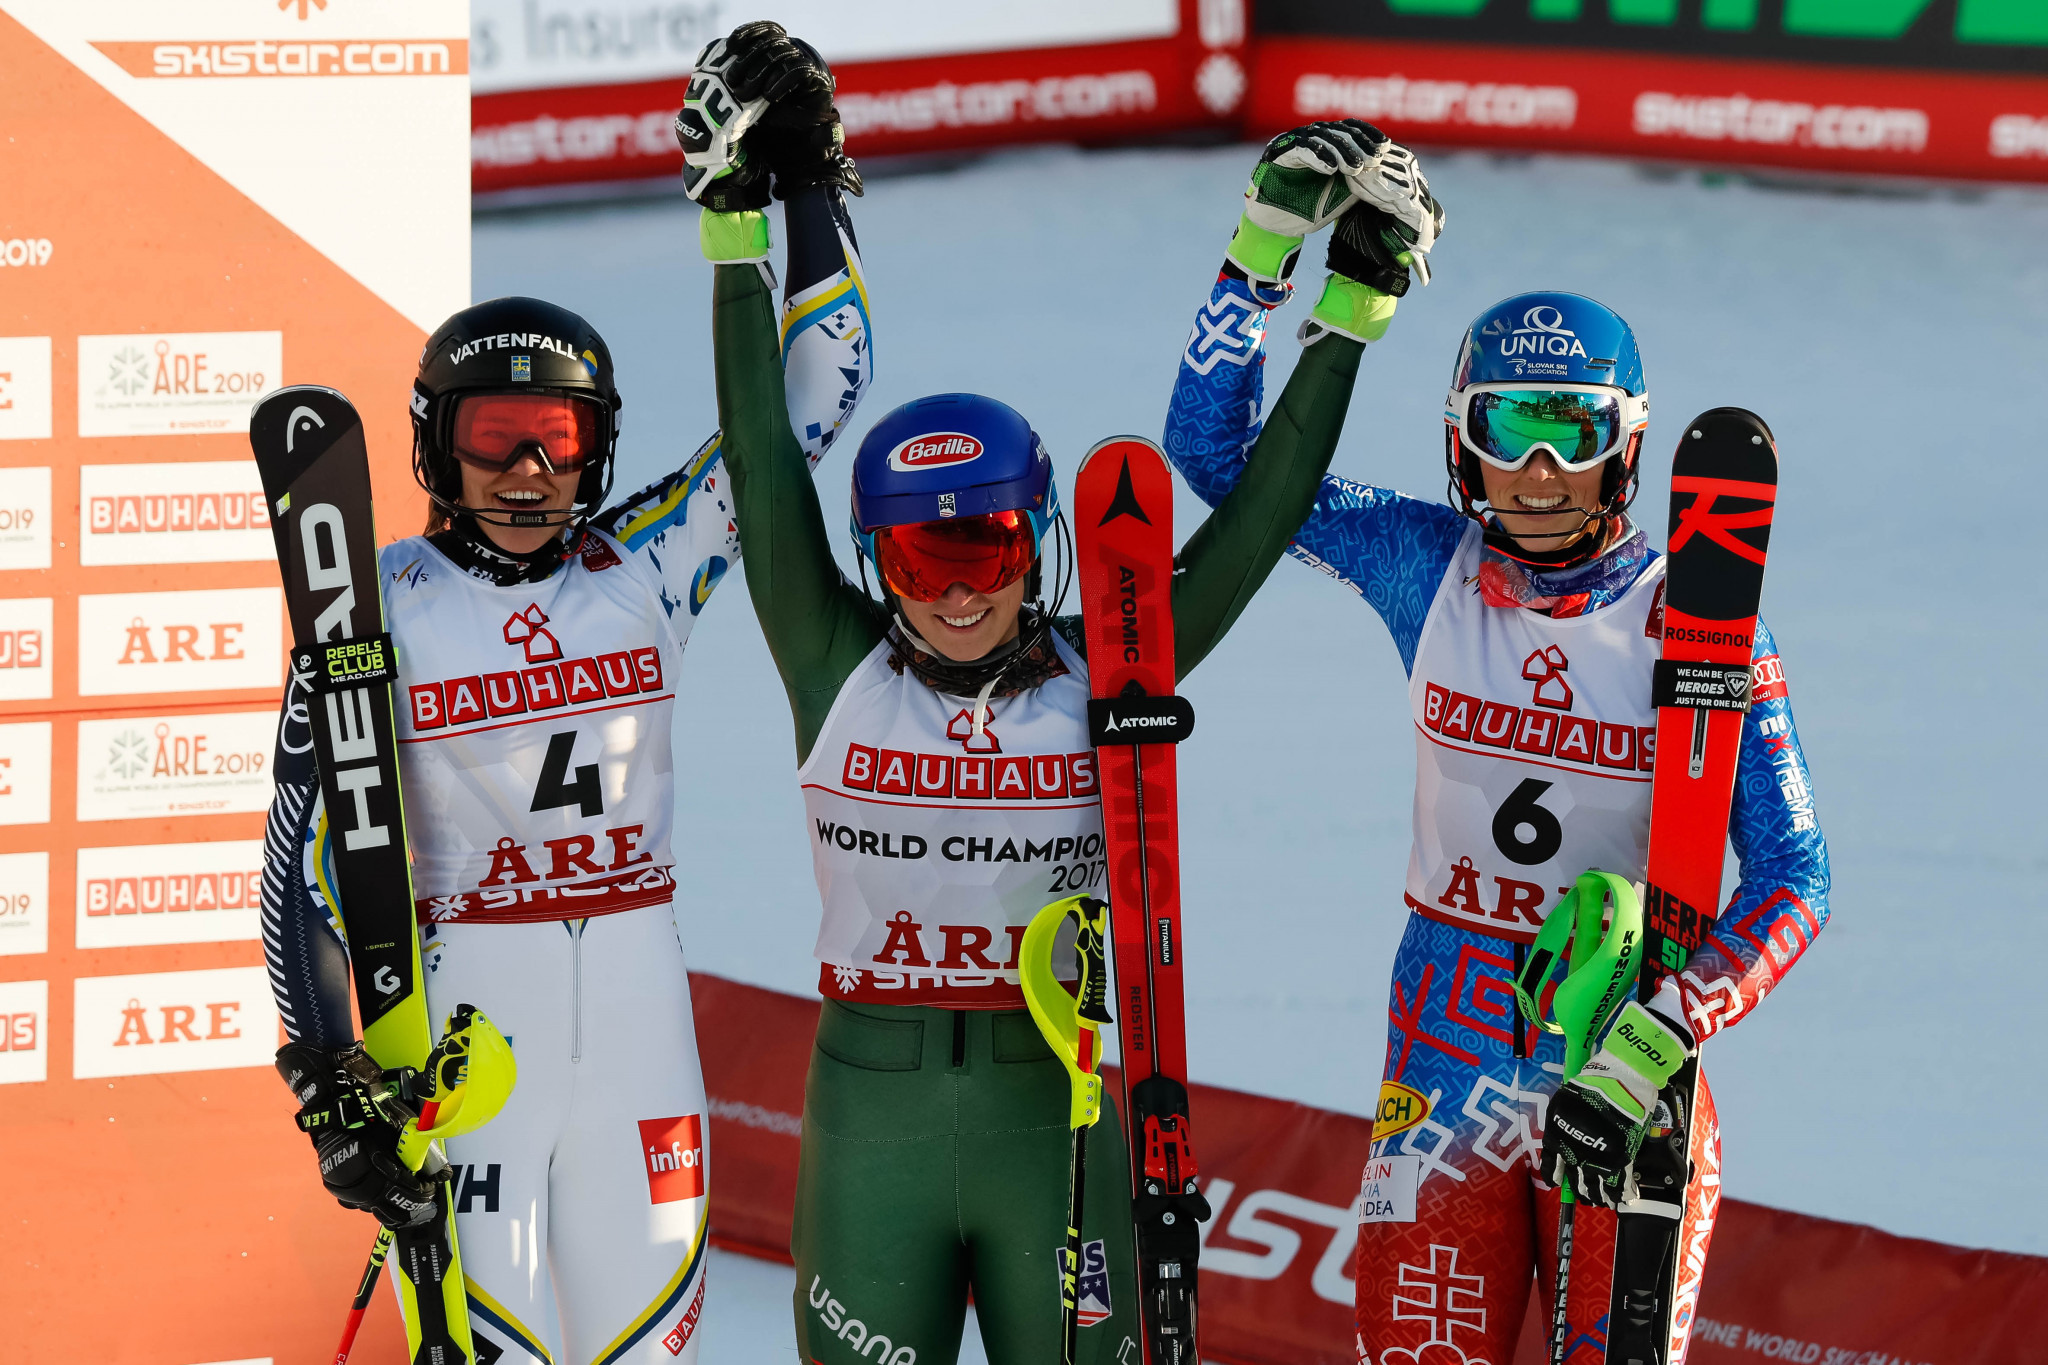 Mikaela Shiffrin triumphed in the women's slalom competition ©Getty Images